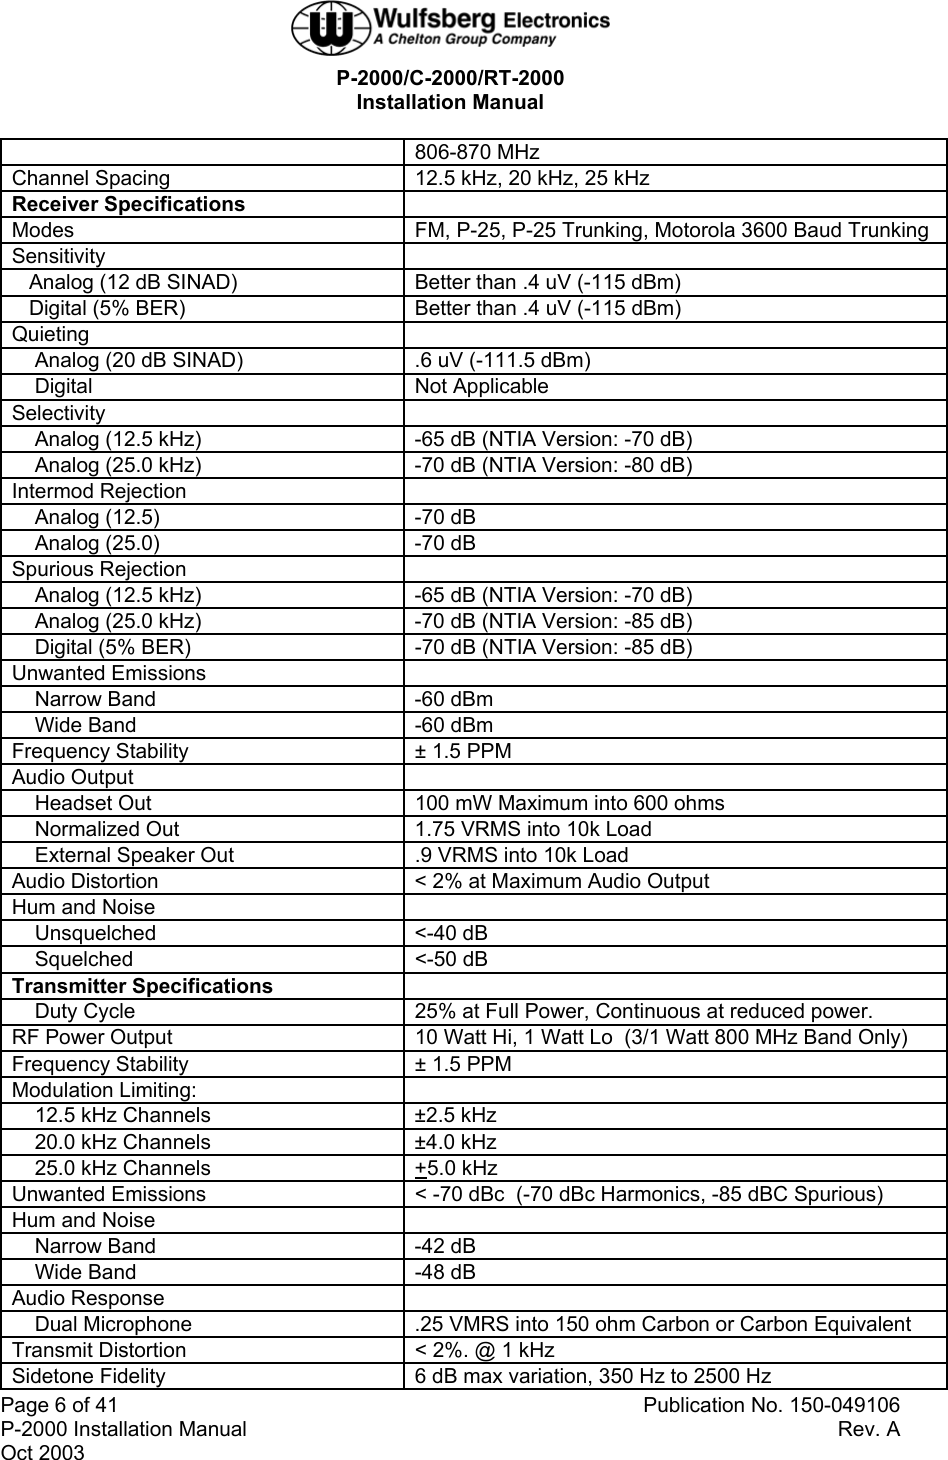  P-2000/C-2000/RT-2000 Installation Manual  Page 6 of 41   Publication No. 150-049106 P-2000 Installation Manual  Rev. A Oct 2003     806-870 MHz Channel Spacing  12.5 kHz, 20 kHz, 25 kHz Receiver Specifications   Modes  FM, P-25, P-25 Trunking, Motorola 3600 Baud Trunking Sensitivity     Analog (12 dB SINAD)  Better than .4 uV (-115 dBm)    Digital (5% BER)  Better than .4 uV (-115 dBm) Quieting      Analog (20 dB SINAD)  .6 uV (-111.5 dBm)     Digital  Not Applicable Selectivity      Analog (12.5 kHz)  -65 dB (NTIA Version: -70 dB)     Analog (25.0 kHz)  -70 dB (NTIA Version: -80 dB) Intermod Rejection       Analog (12.5)  -70 dB     Analog (25.0)  -70 dB Spurious Rejection       Analog (12.5 kHz)  -65 dB (NTIA Version: -70 dB)     Analog (25.0 kHz)  -70 dB (NTIA Version: -85 dB)     Digital (5% BER)  -70 dB (NTIA Version: -85 dB) Unwanted Emissions       Narrow Band  -60 dBm     Wide Band  -60 dBm Frequency Stability  ± 1.5 PPM Audio Output       Headset Out  100 mW Maximum into 600 ohms      Normalized Out  1.75 VRMS into 10k Load     External Speaker Out  .9 VRMS into 10k Load Audio Distortion  &lt; 2% at Maximum Audio Output Hum and Noise       Unsquelched  &lt;-40 dB     Squelched  &lt;-50 dB Transmitter Specifications       Duty Cycle  25% at Full Power, Continuous at reduced power. RF Power Output  10 Watt Hi, 1 Watt Lo  (3/1 Watt 800 MHz Band Only) Frequency Stability  ± 1.5 PPM Modulation Limiting:       12.5 kHz Channels  ±2.5 kHz      20.0 kHz Channels  ±4.0 kHz     25.0 kHz Channels  +5.0 kHz Unwanted Emissions  &lt; -70 dBc  (-70 dBc Harmonics, -85 dBC Spurious) Hum and Noise       Narrow Band  -42 dB     Wide Band  -48 dB Audio Response       Dual Microphone  .25 VMRS into 150 ohm Carbon or Carbon Equivalent  Transmit Distortion  &lt; 2%. @ 1 kHz Sidetone Fidelity  6 dB max variation, 350 Hz to 2500 Hz 